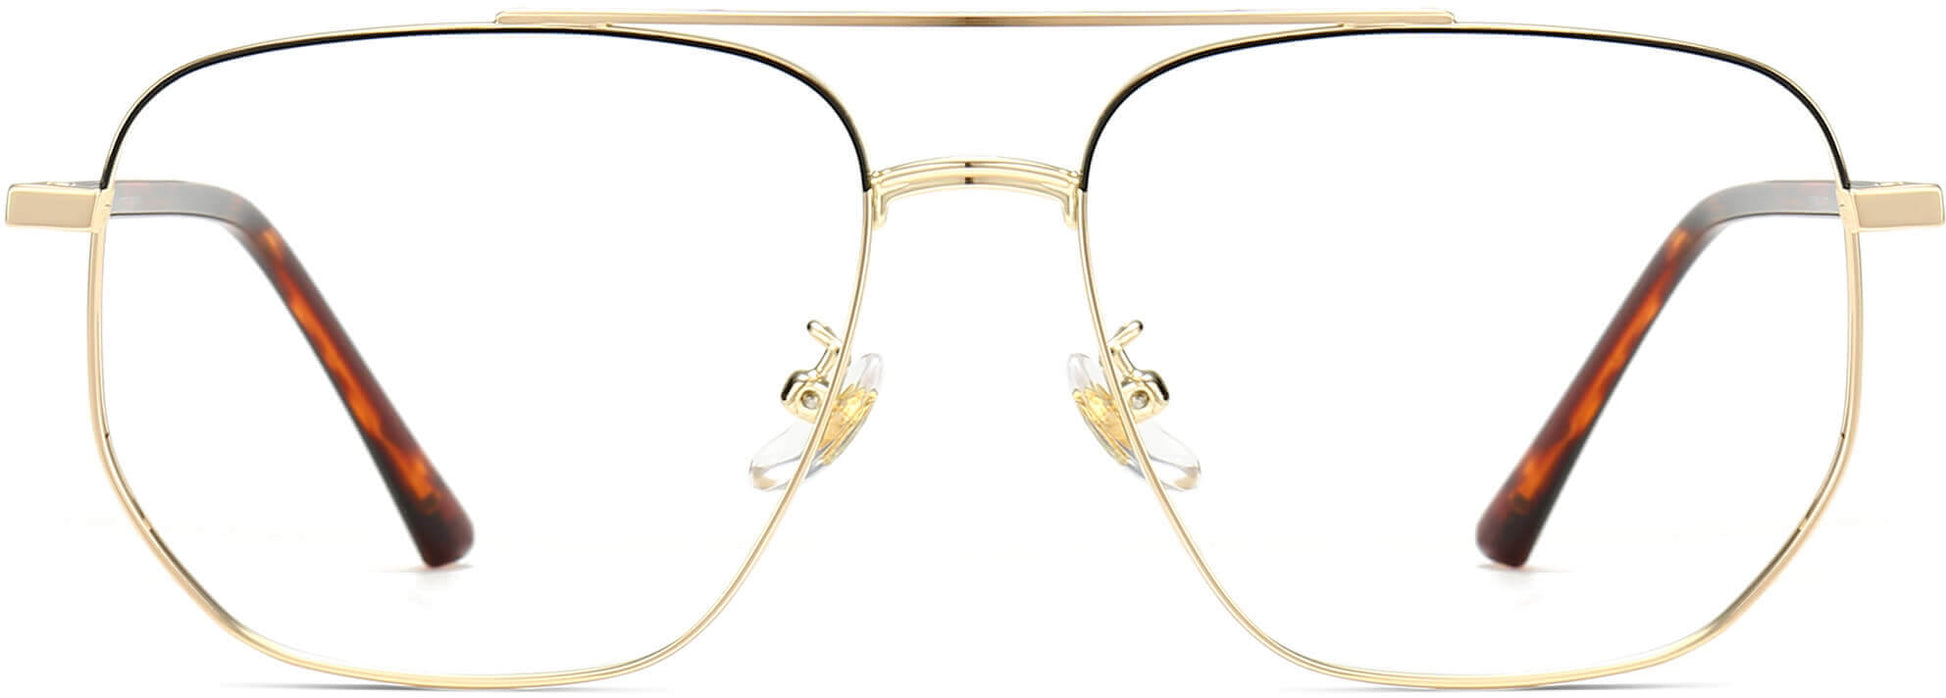 Rio Geometric Gold Eyeglasses from ANRRI, front view